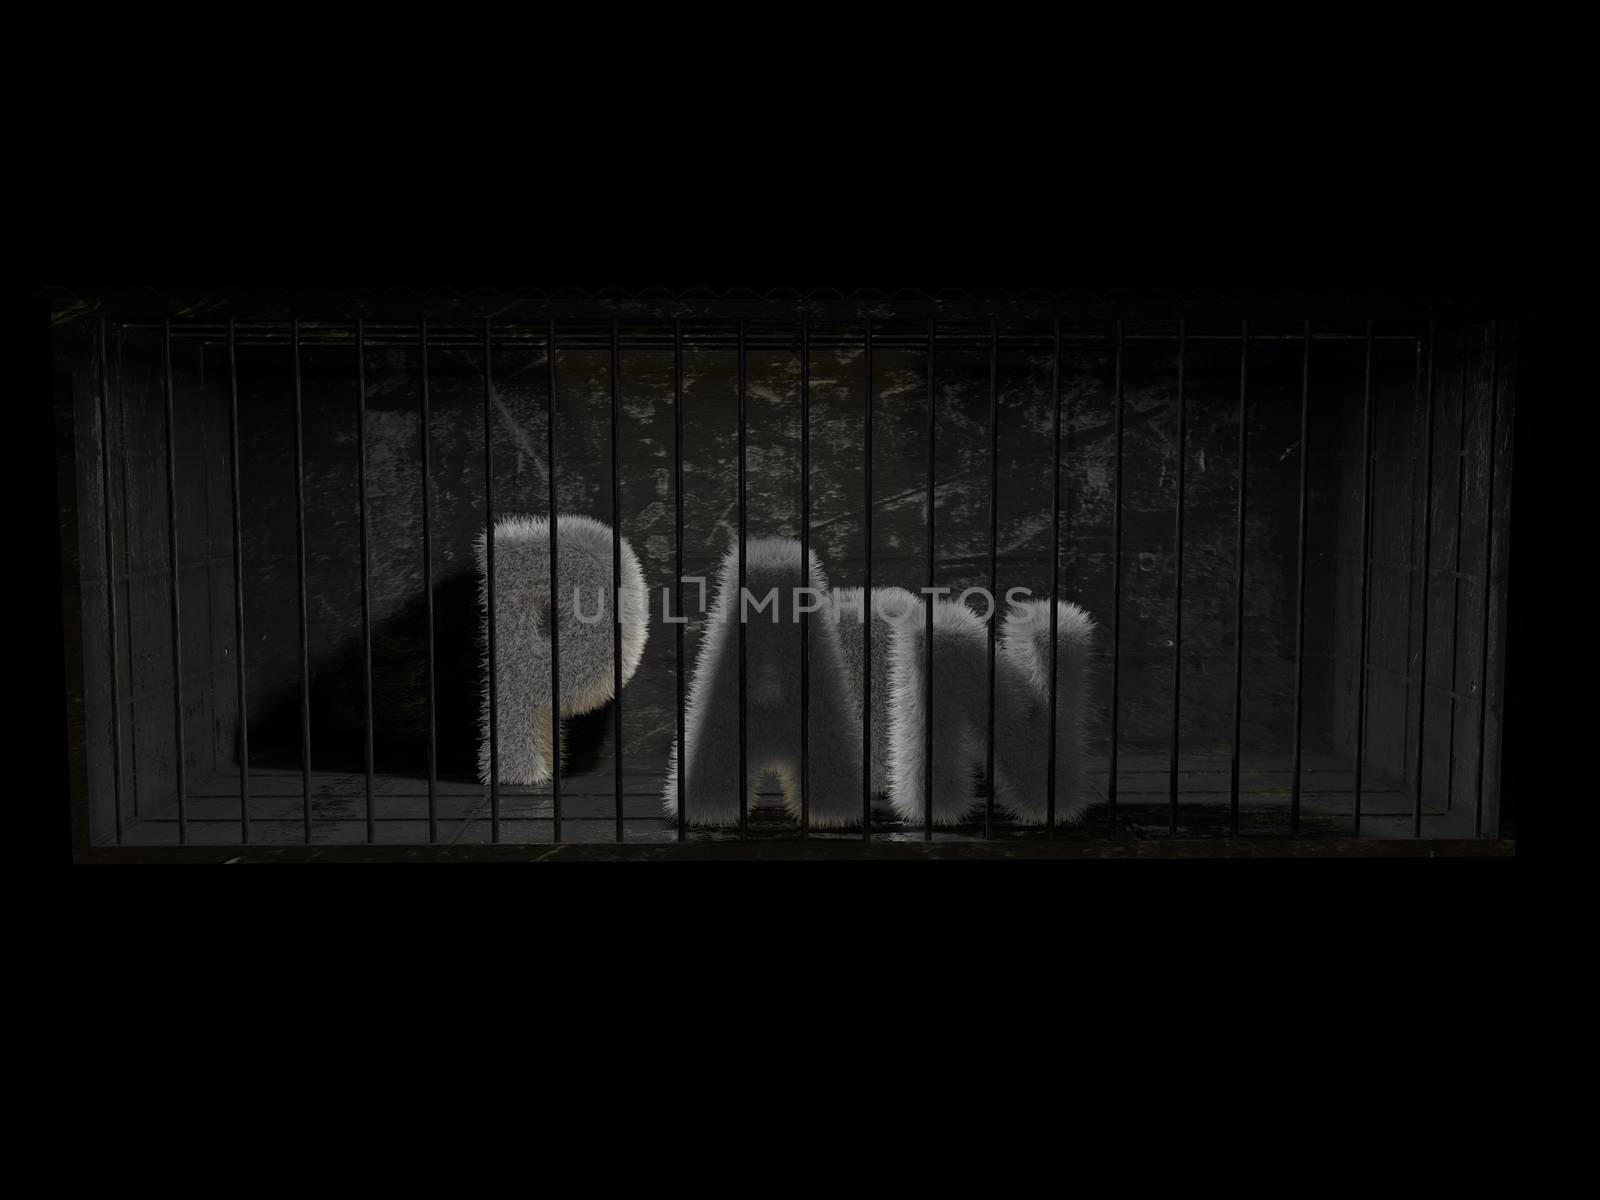 A fluffy word (pain) with white hair behind bars with black background.